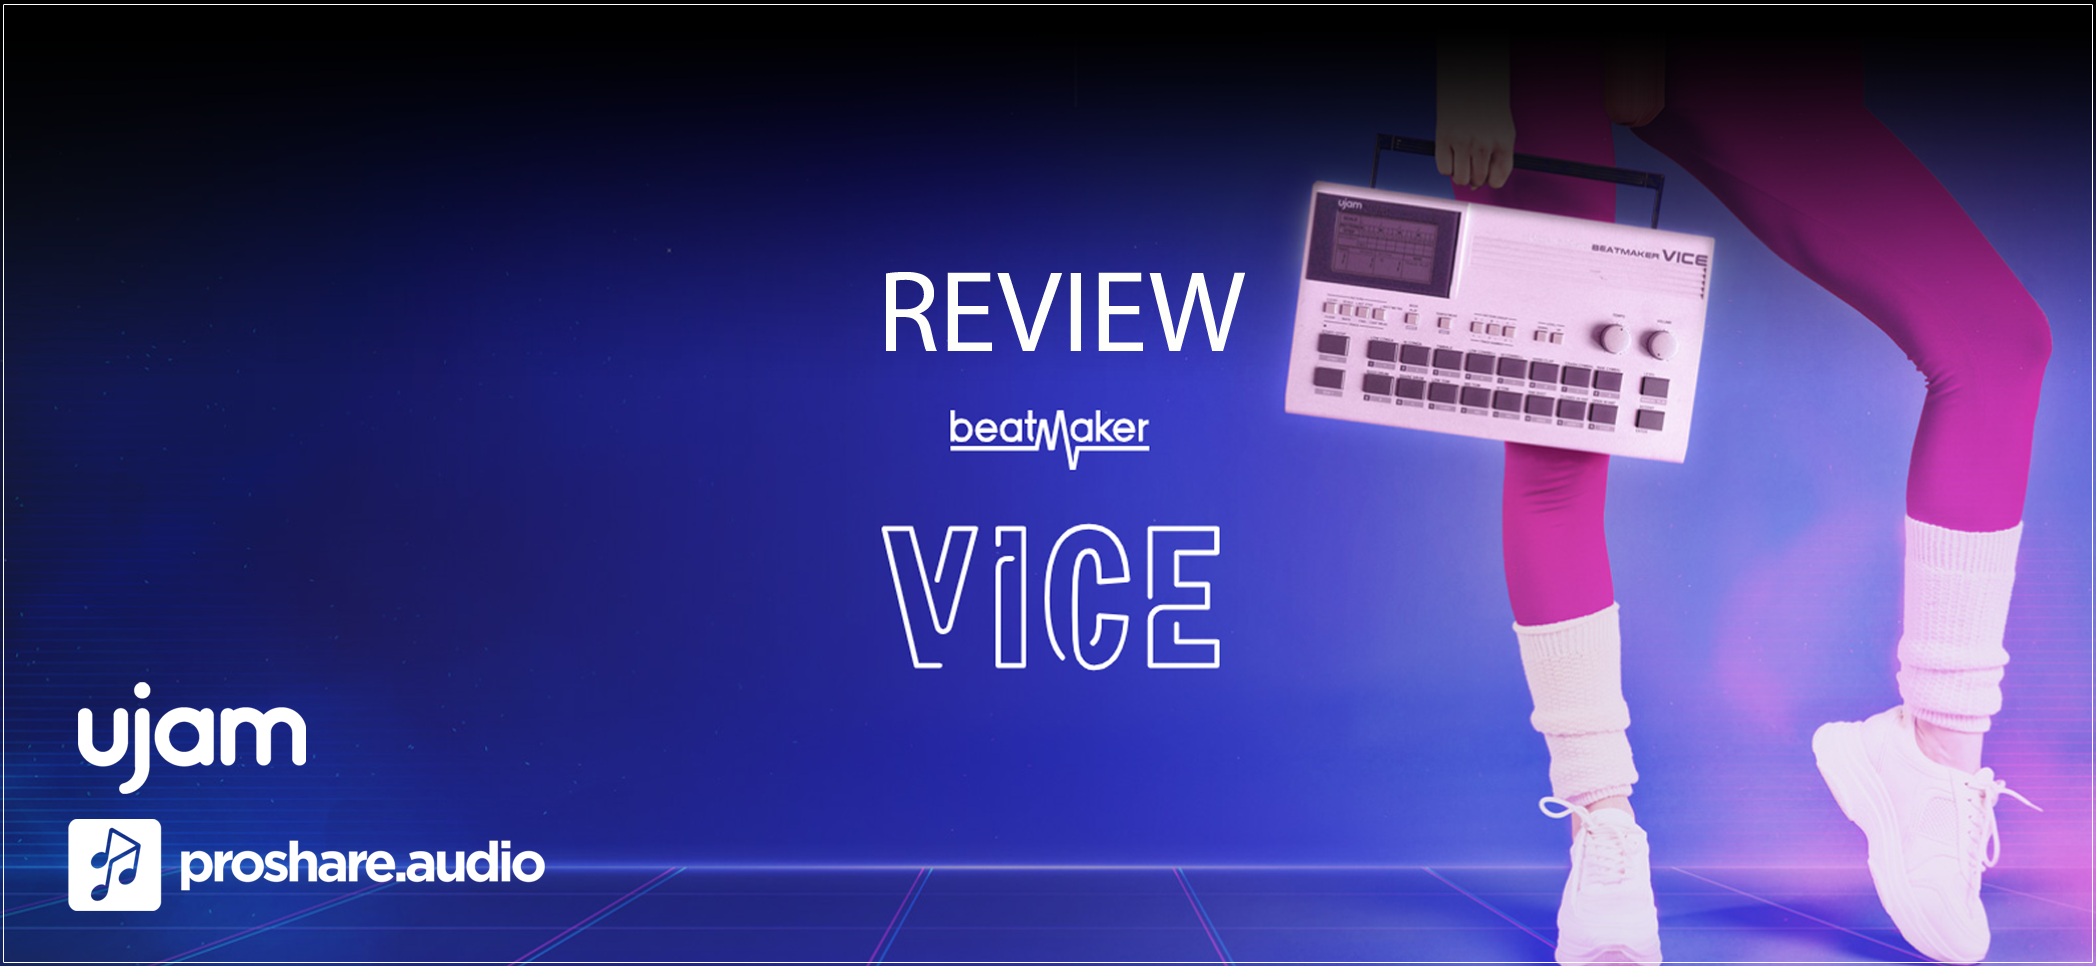 Beatmaker Vice - Review and Giveaway!